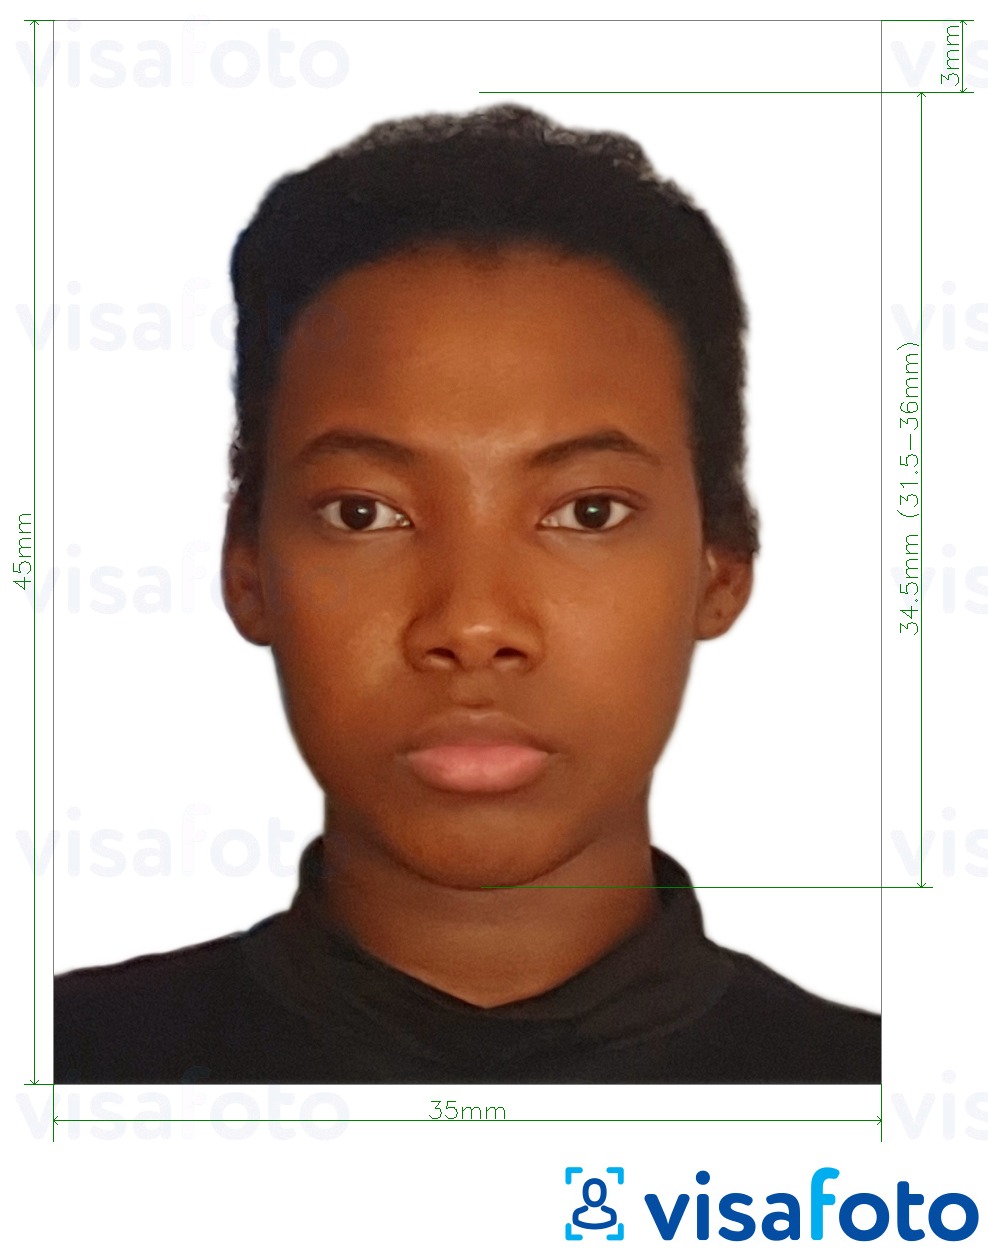 Example of photo for Madagascar visa 3.5x4.5 cm (35x45 mm) with exact size specification